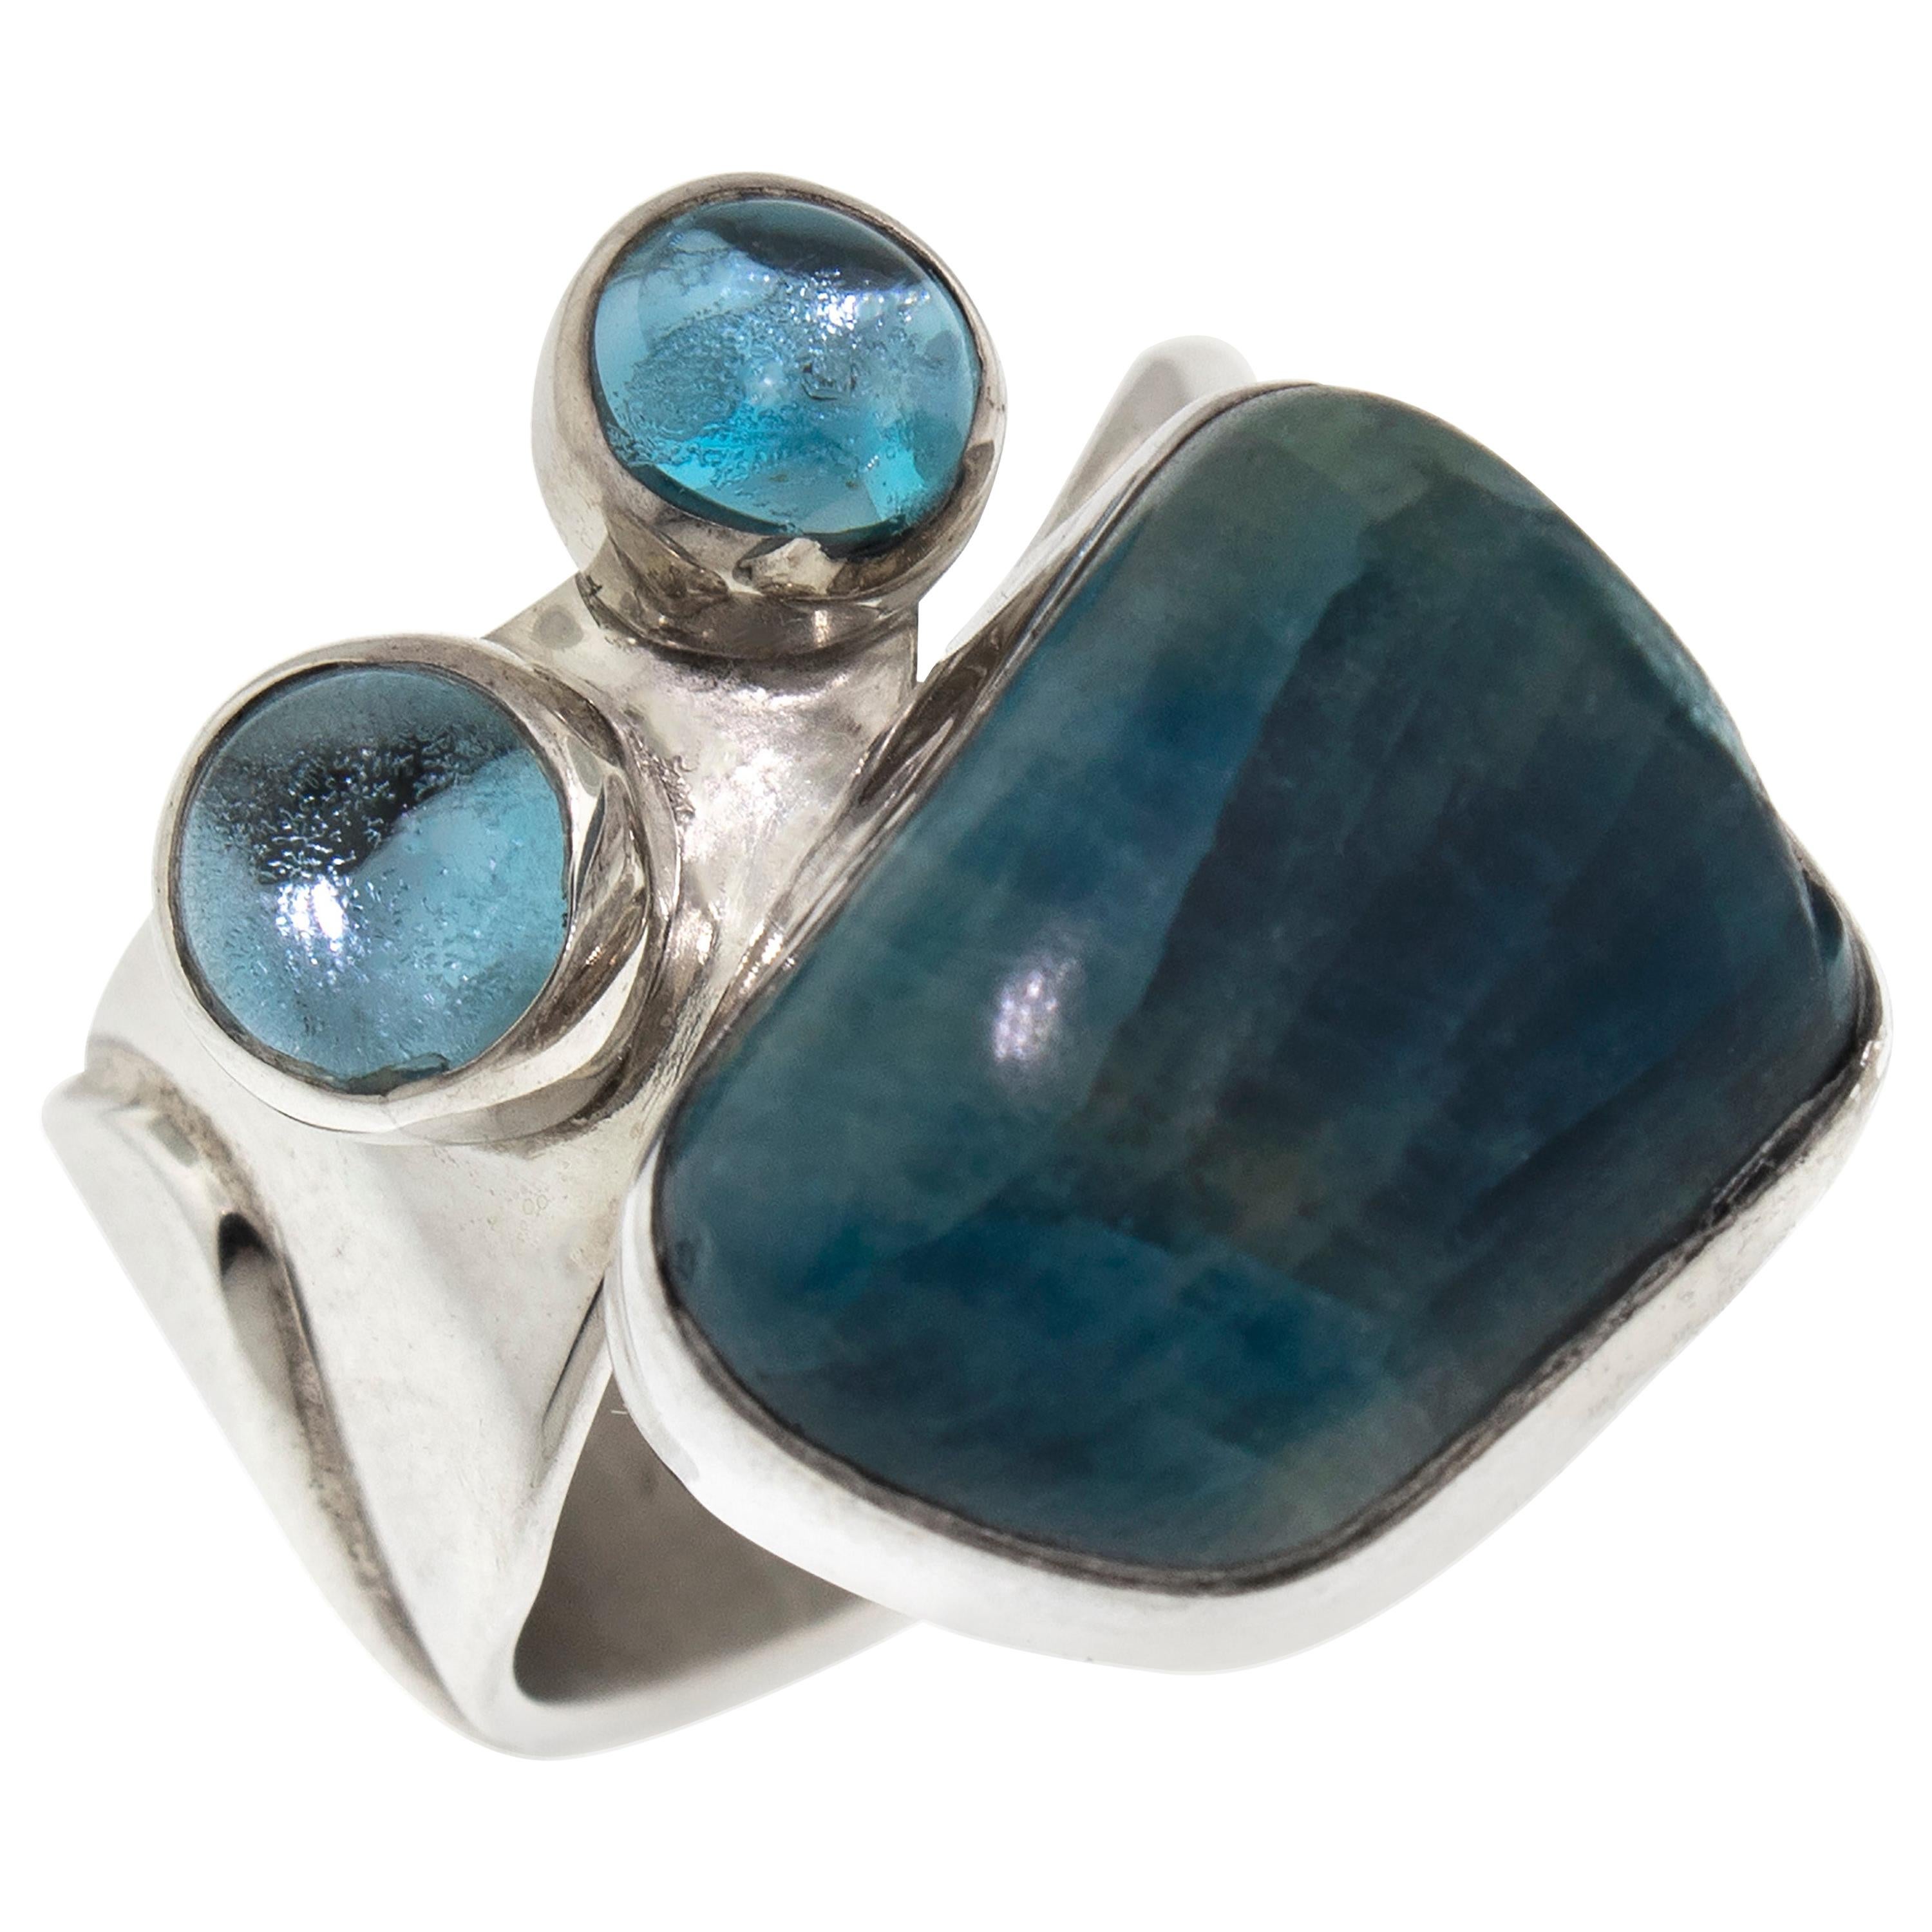 Apatite and Blue Topaz Sterling Silver Ring, Handmade in USA by Lilly Barrack